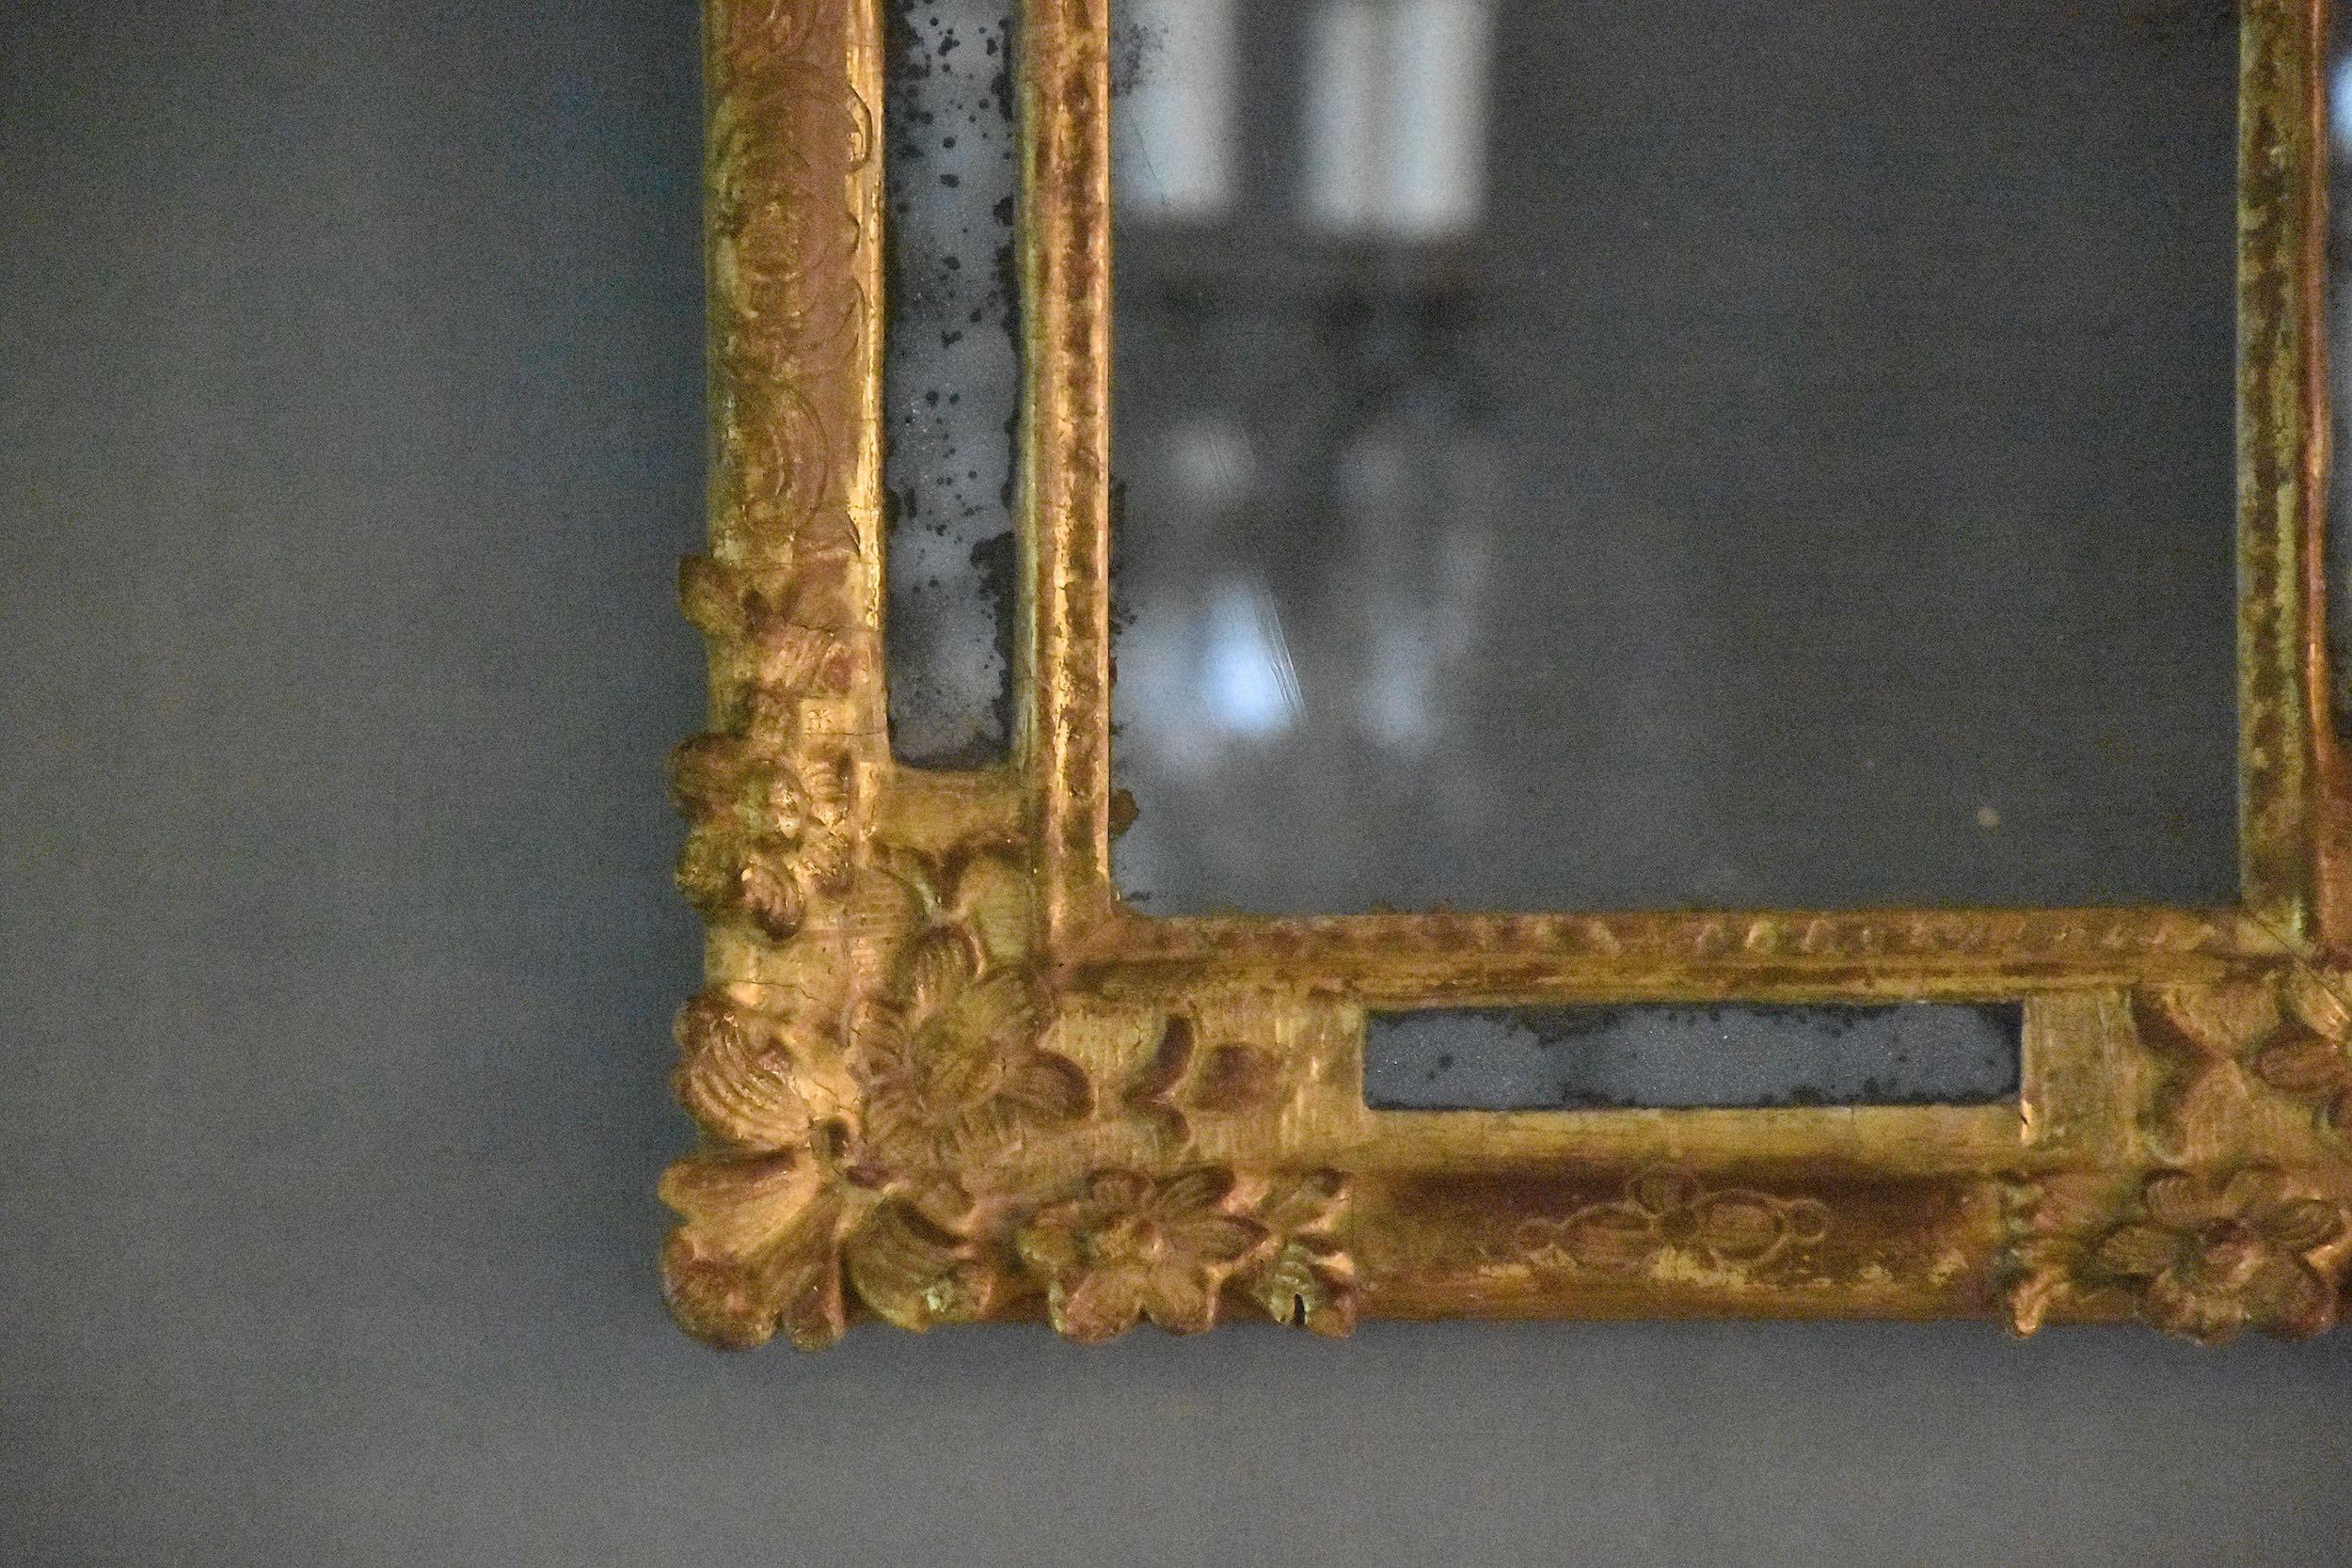 A magnificent carved and gilded French mirror, period Louis XIV.
The crest and the frame decorated with flowers and acanthus leaf. 
Original mercury glass. 
Very beautiful piece and in very good antique condition!
